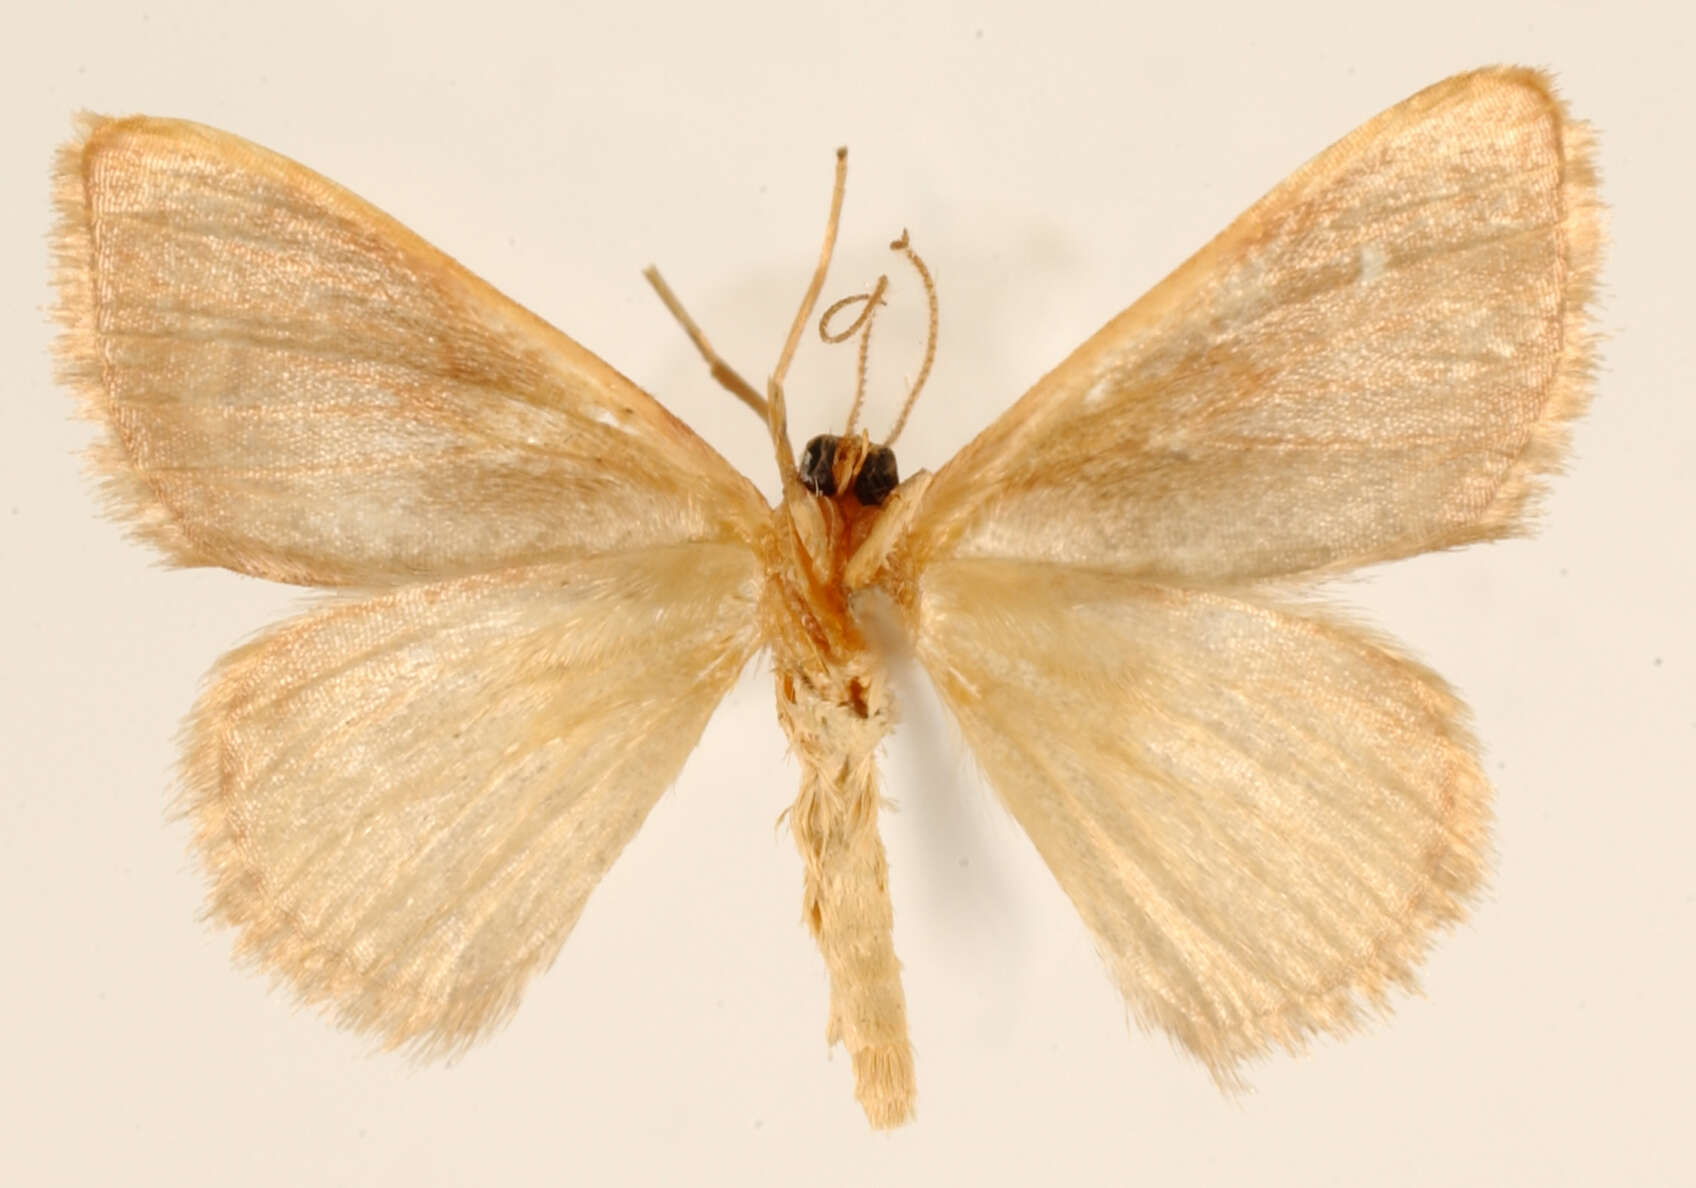 Image of <i>Calyptocome pappasaria</i> Dyar